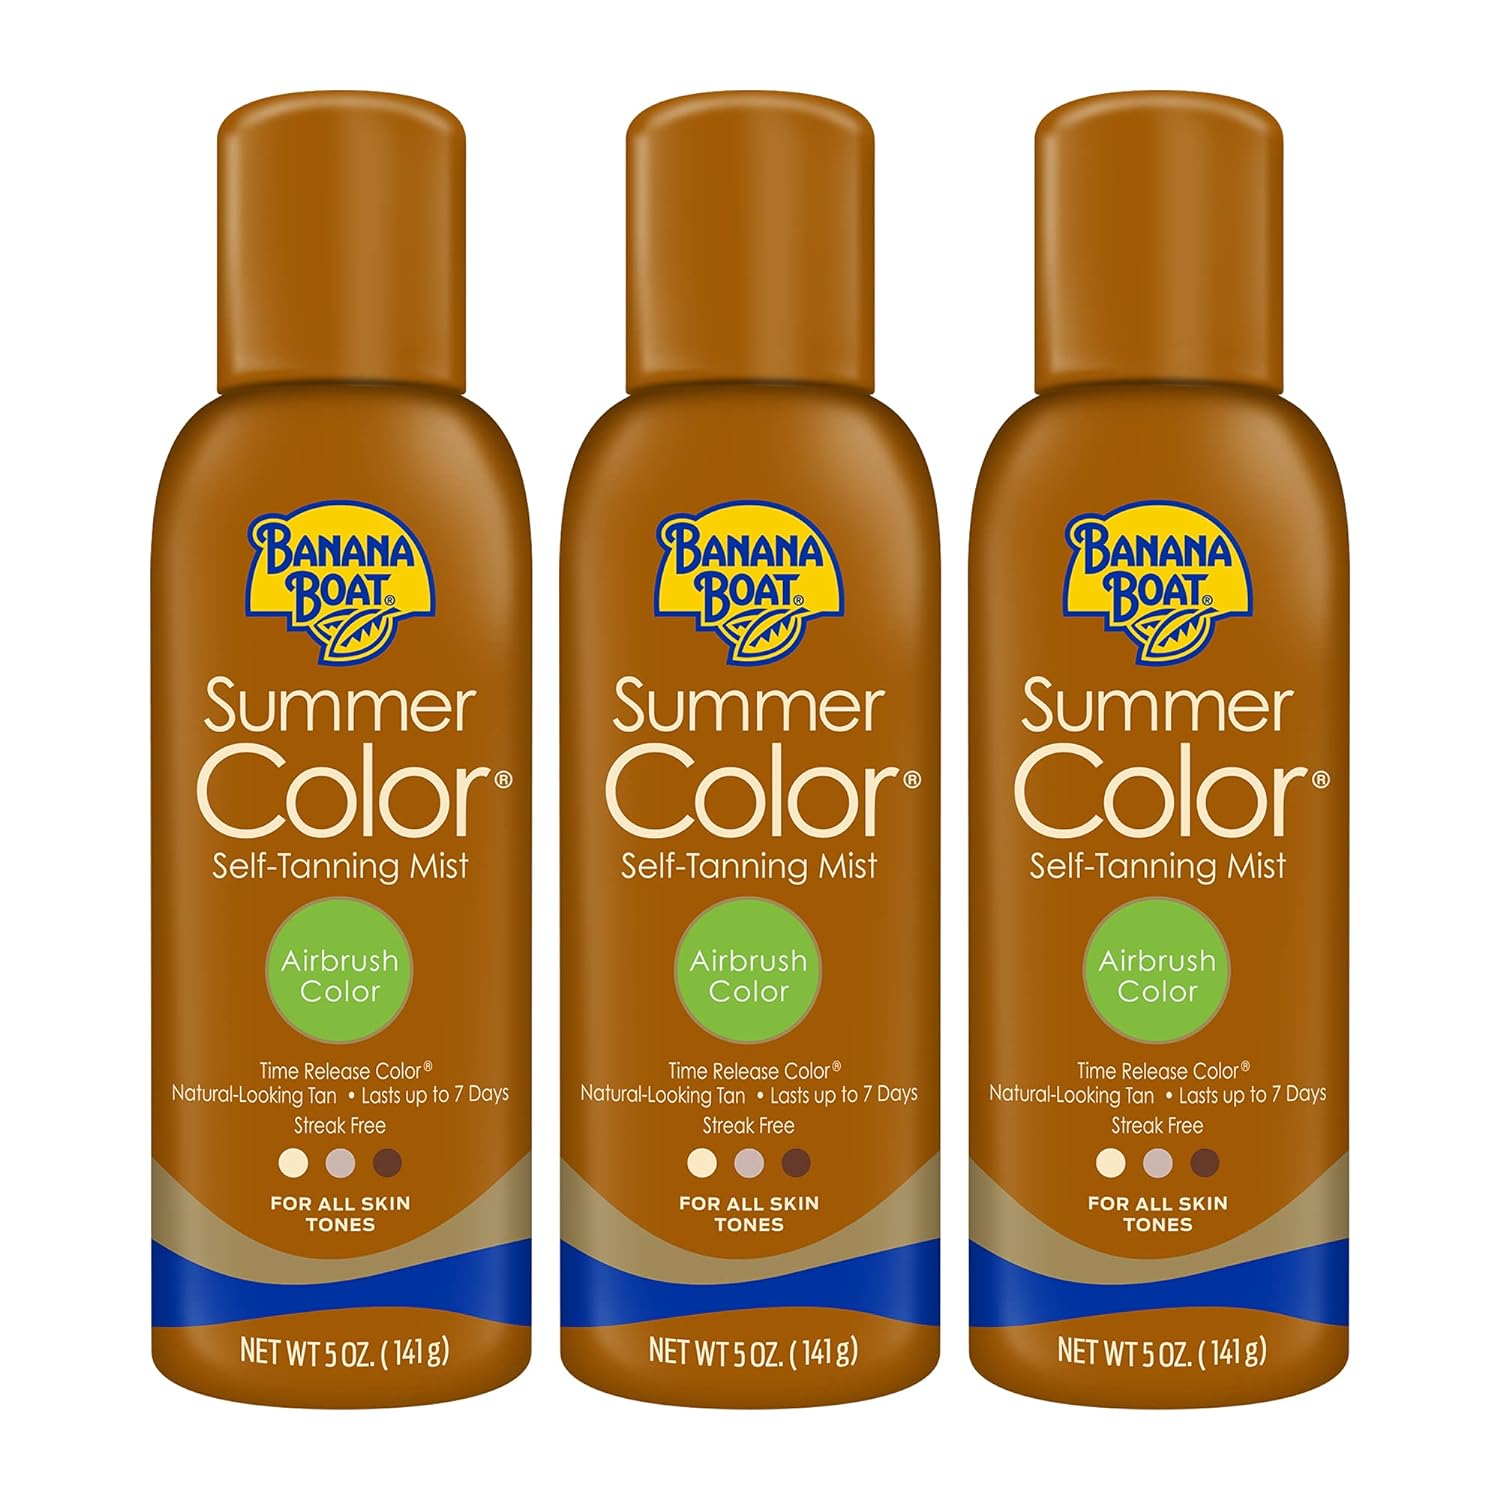 Banana Boat Self Tanning Spray for All Skin Tones, Airbrush Color, Reef Friendly, 5 Ounce - Pack of 3